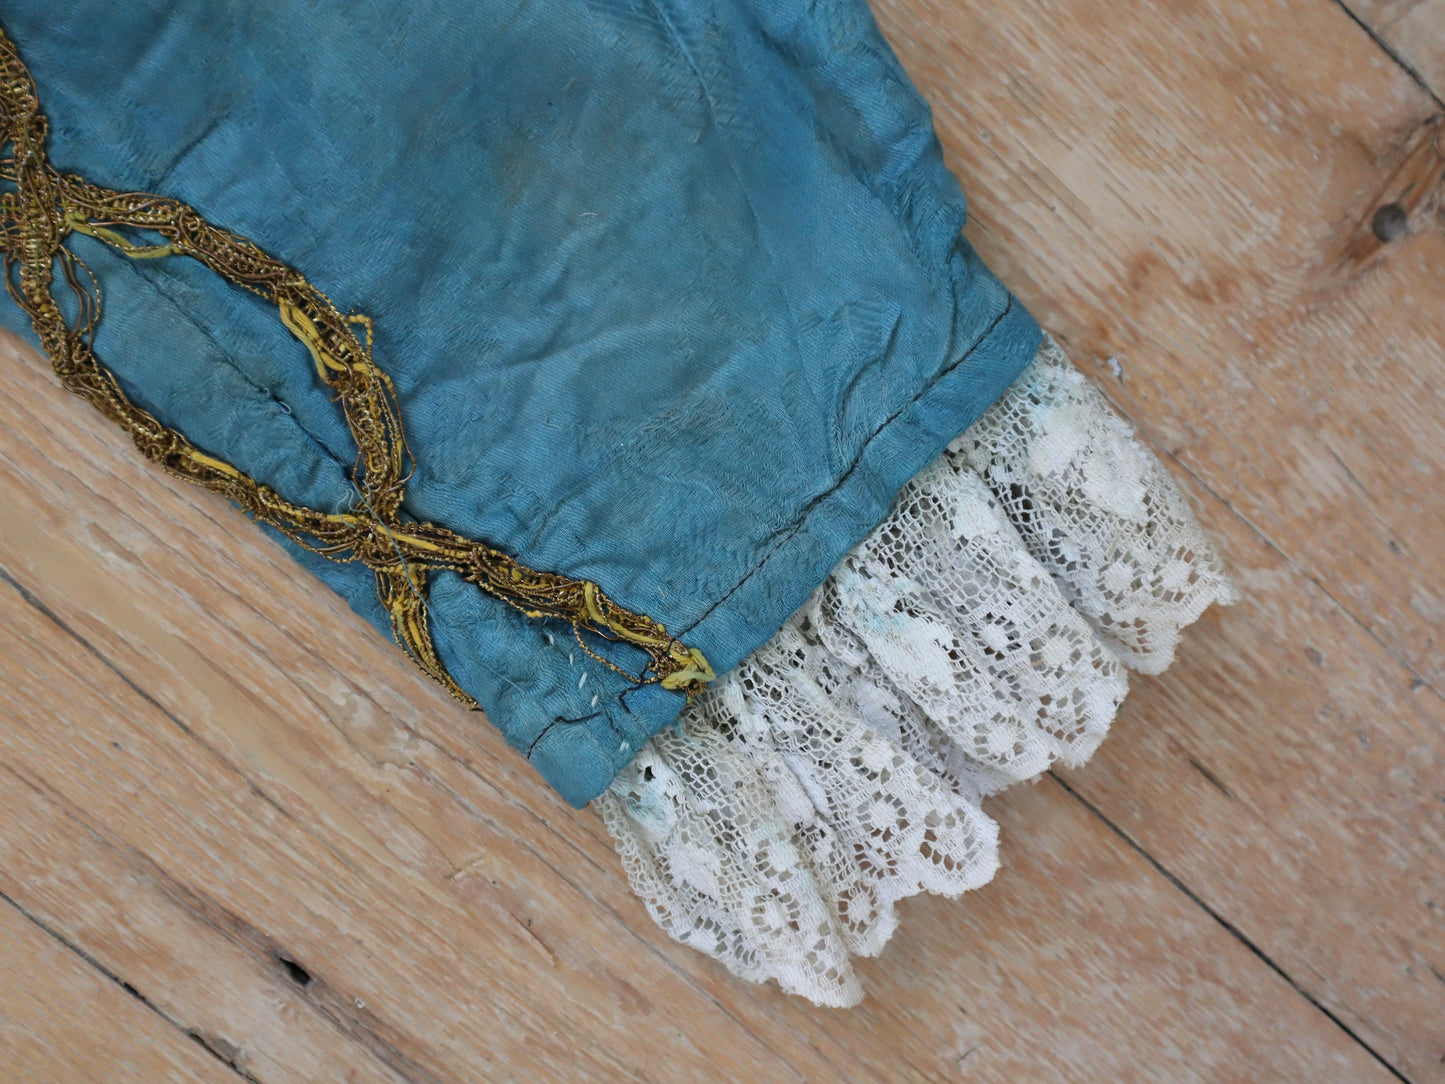 Antique French 19th Century Woven Cotton Blue Renaissance Style Breeches Trousers Pants Gold Metal Ribbon Lace Trim Theatre Opera Costume